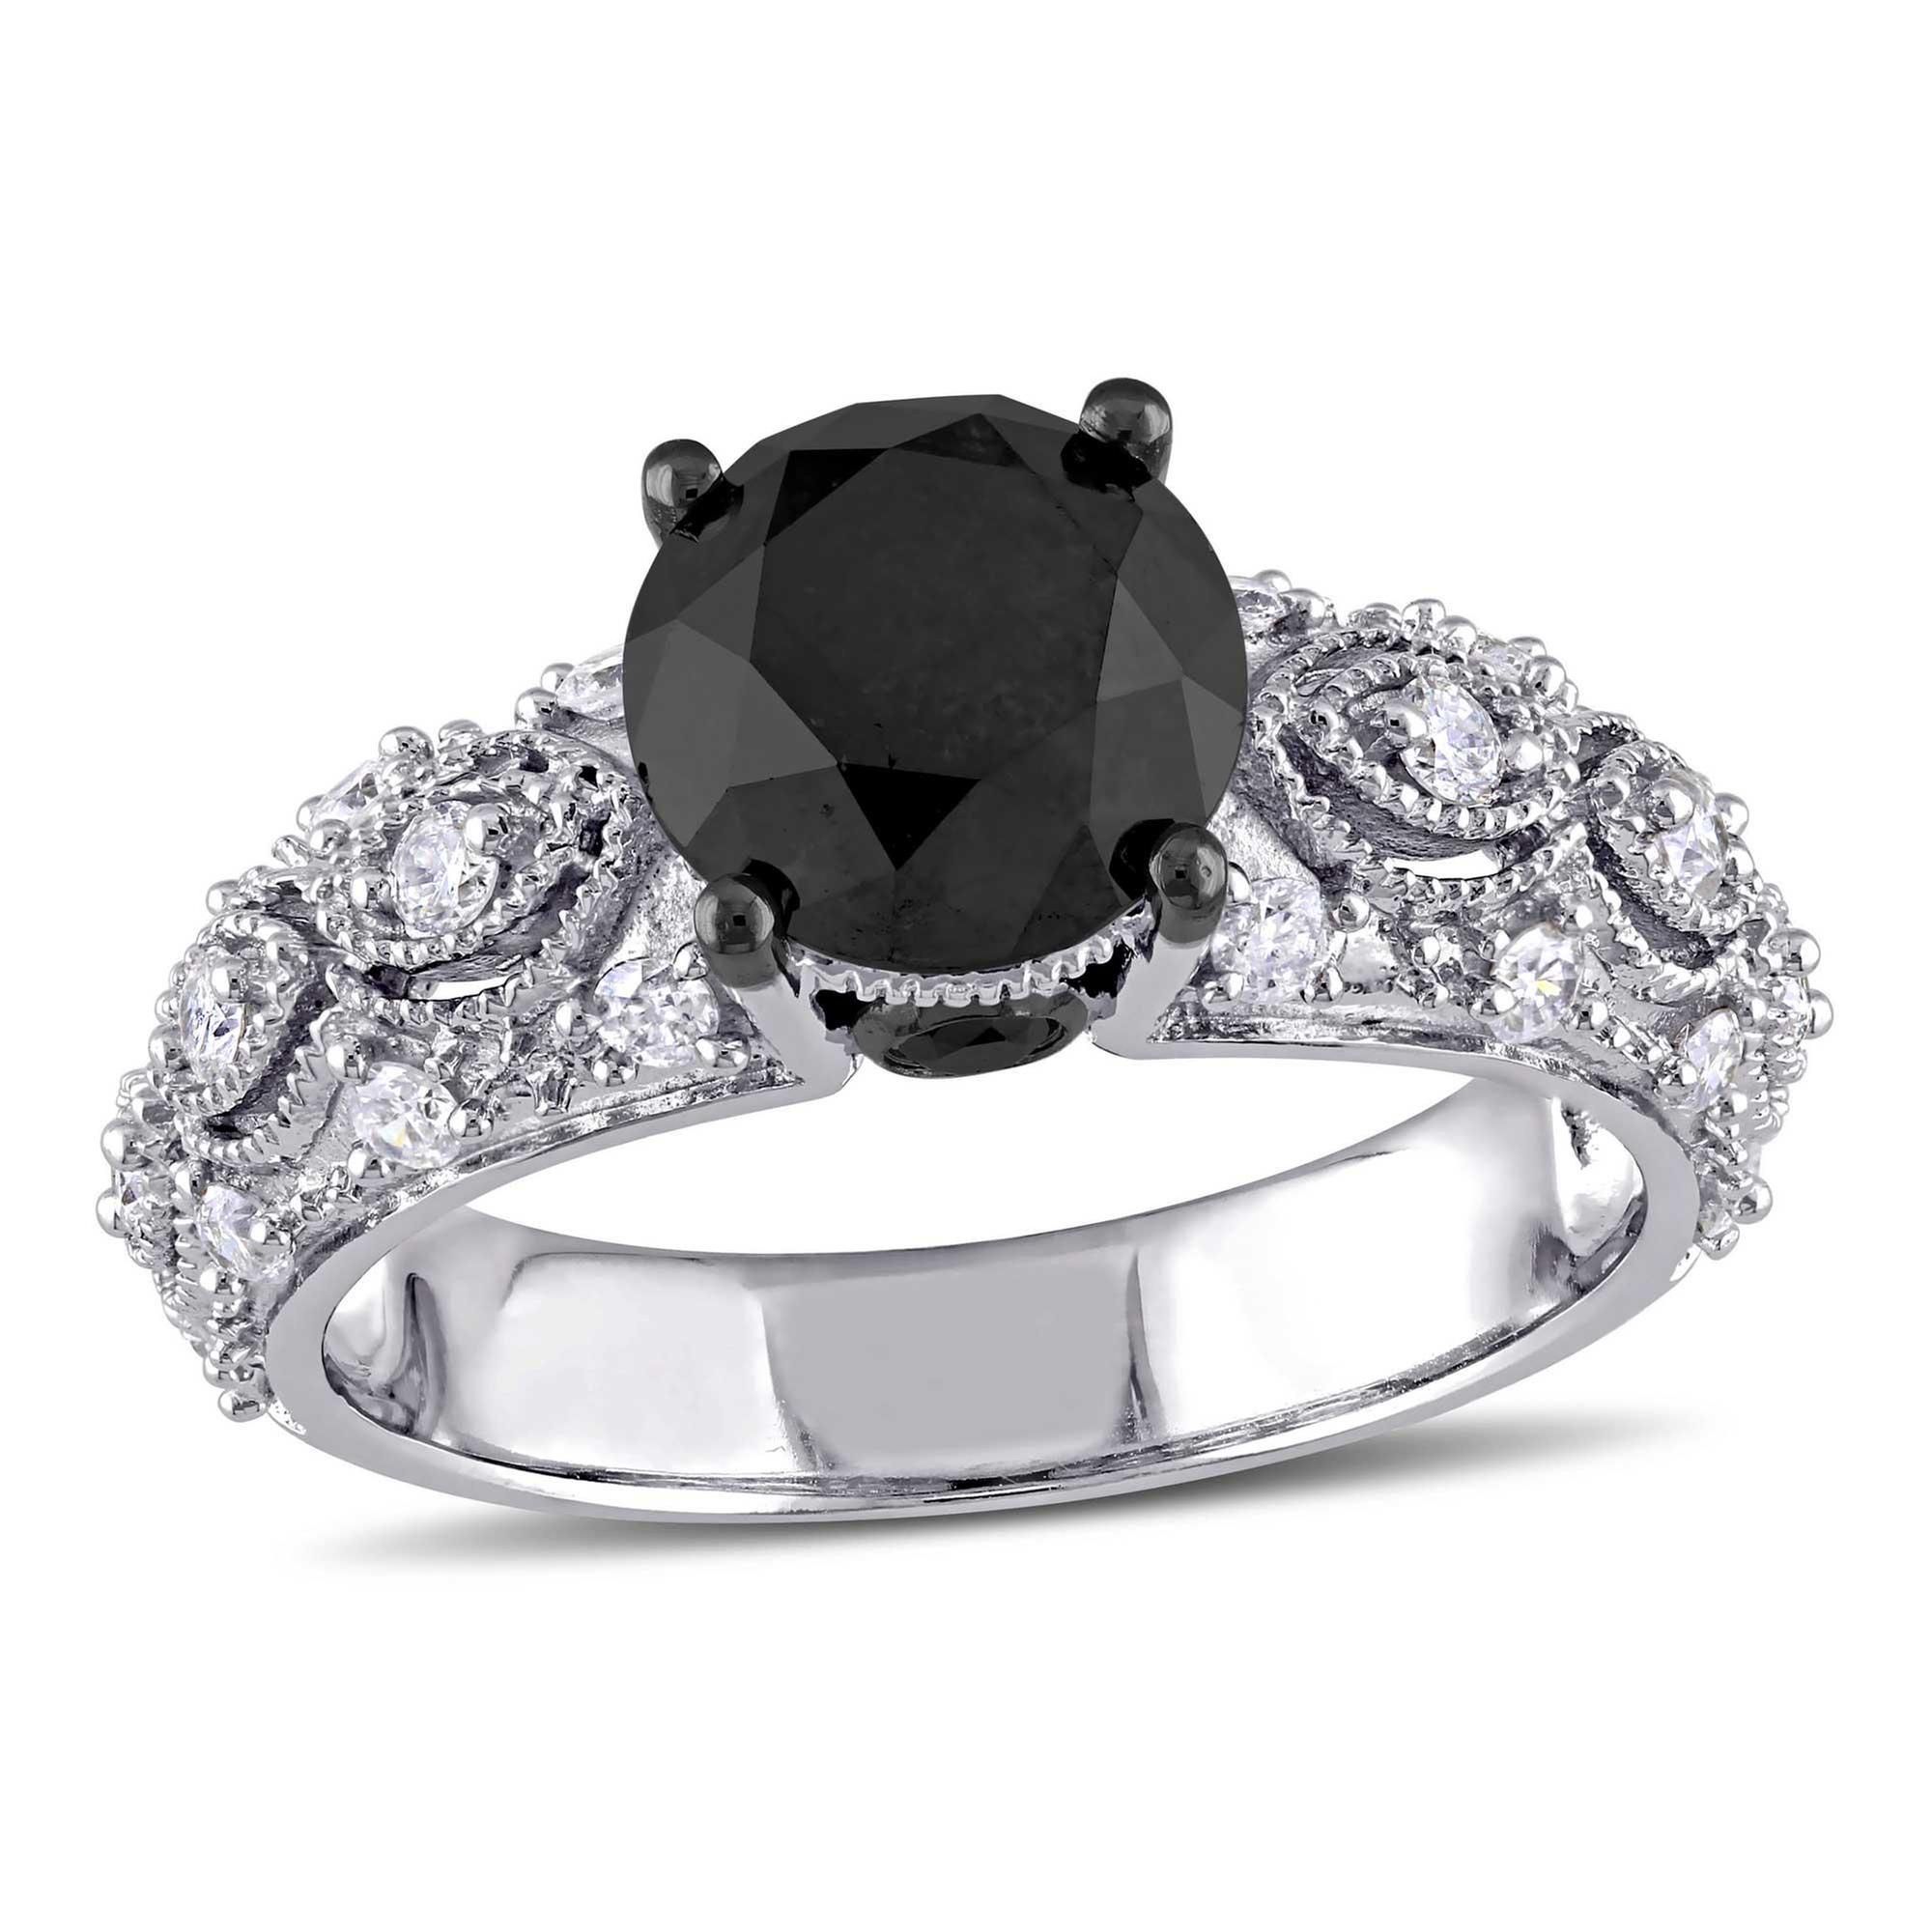 3ctw Black Diamond and Diamond Vintage-Inspired Engagement Ring - Size 10